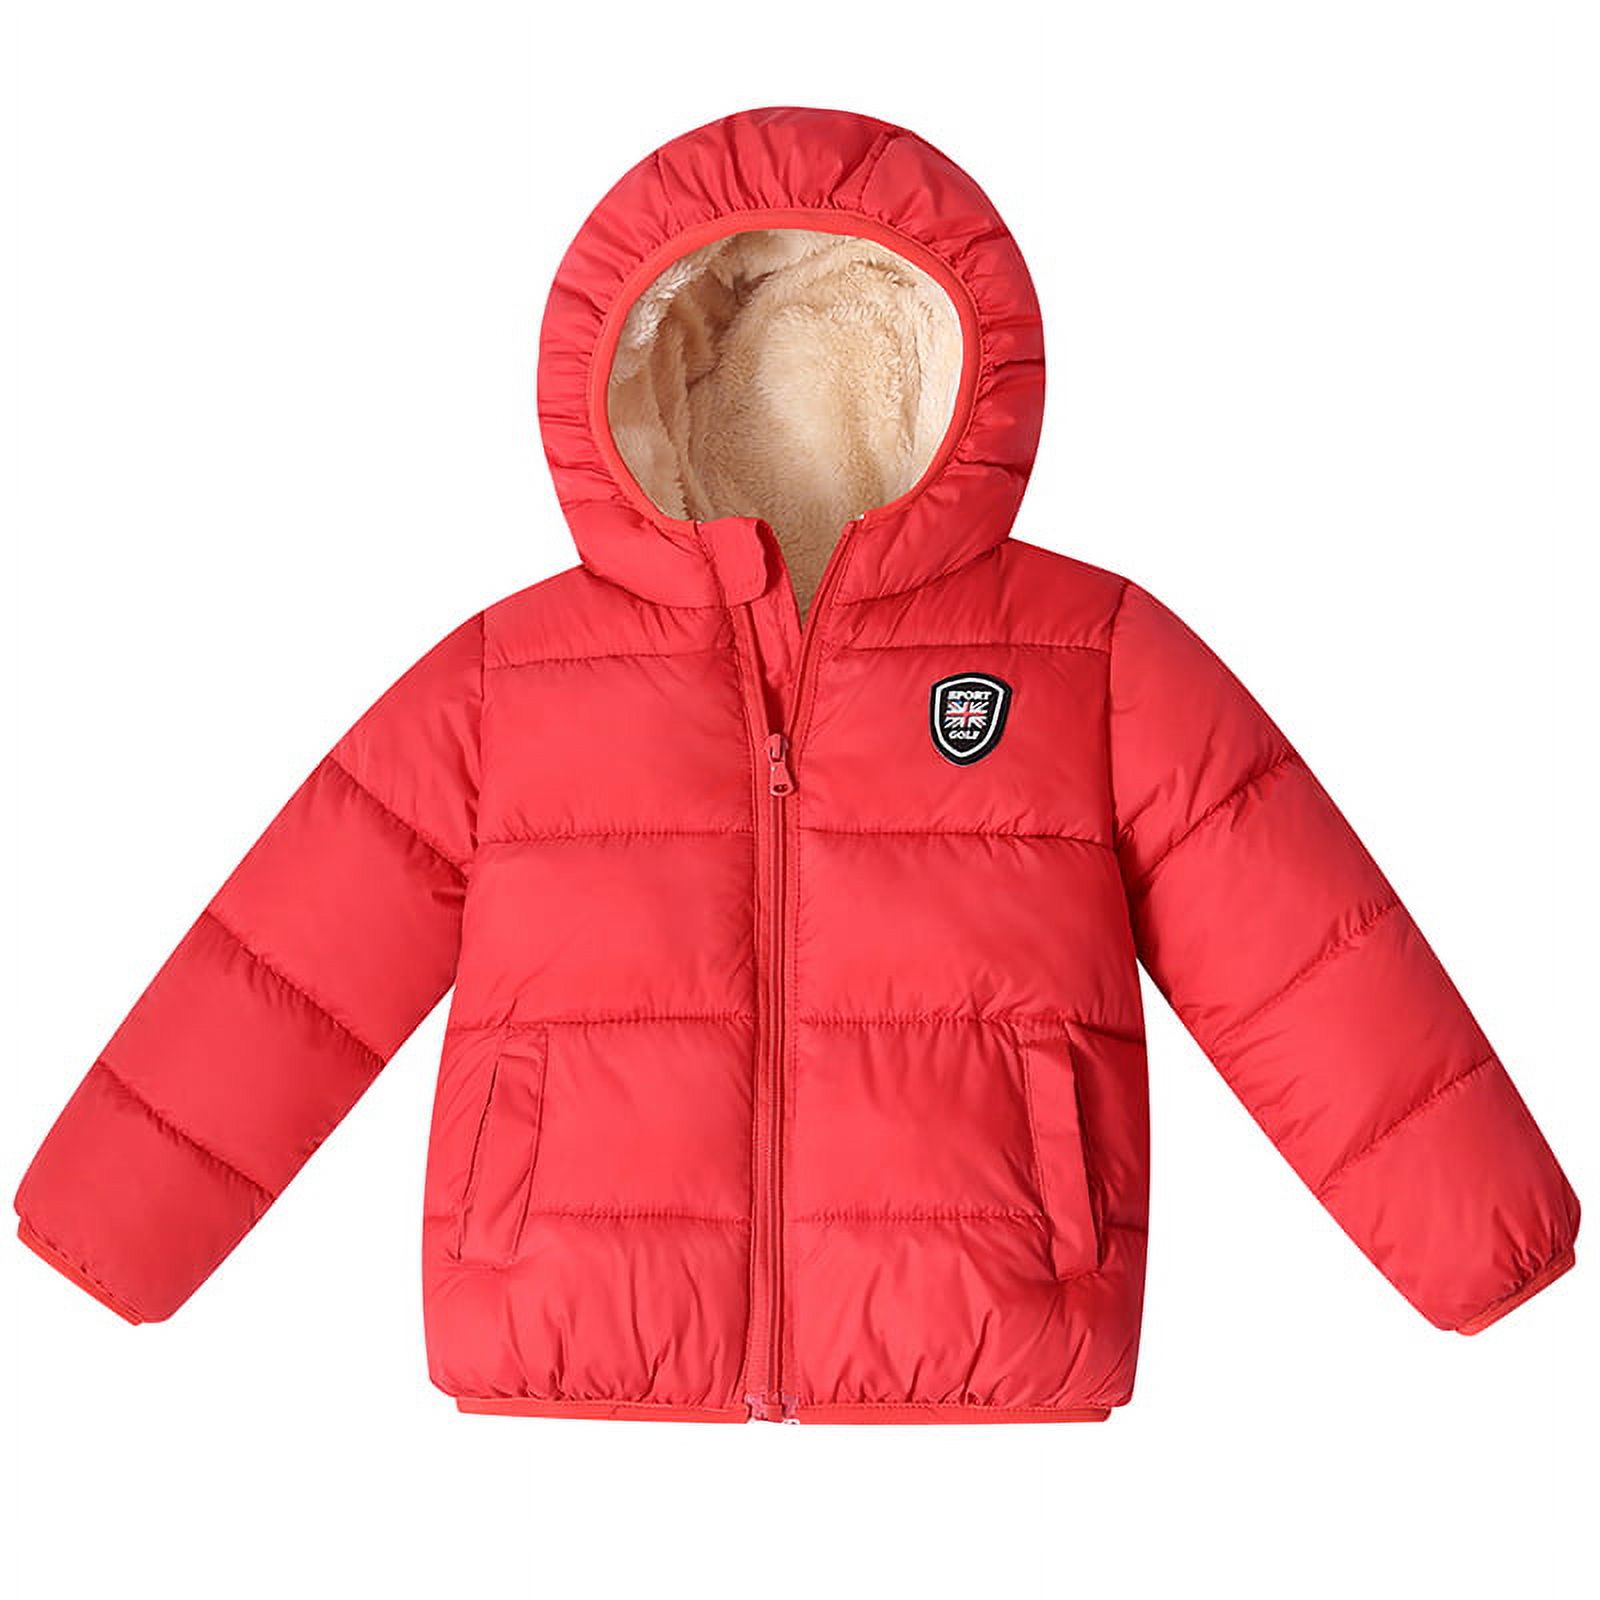 Winter Children Kid's Boy Girl Warm Hooded Jacket Coat Cotton-padded Jacket Parka Overcoat Thick Down Coat for 2-7T - image 2 of 2